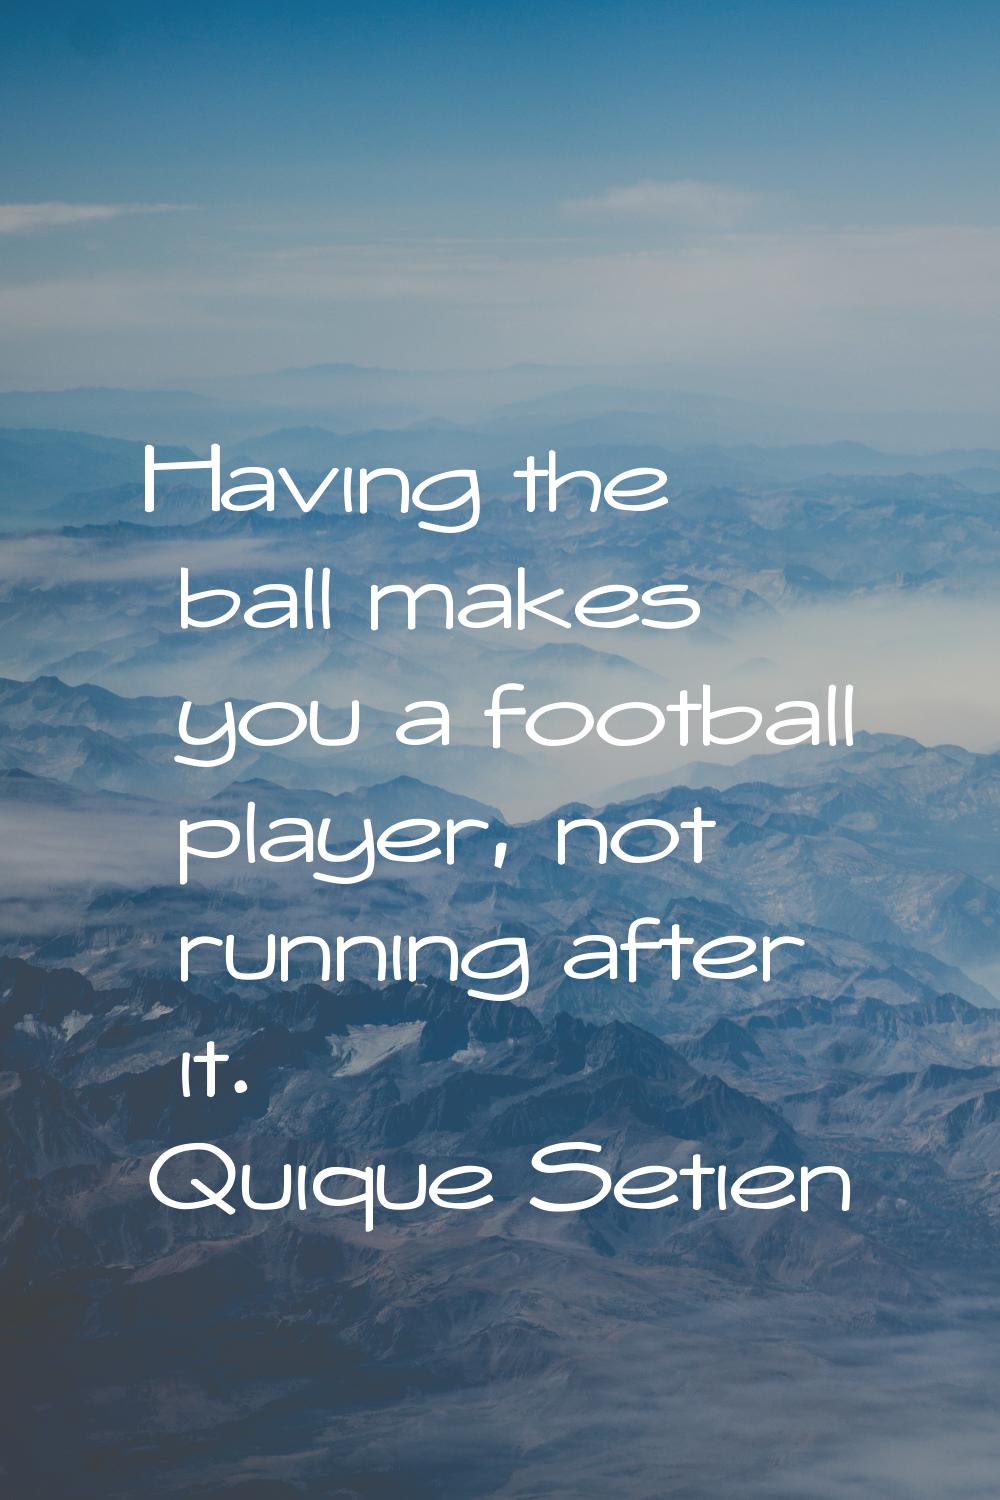 Having the ball makes you a football player, not running after it.